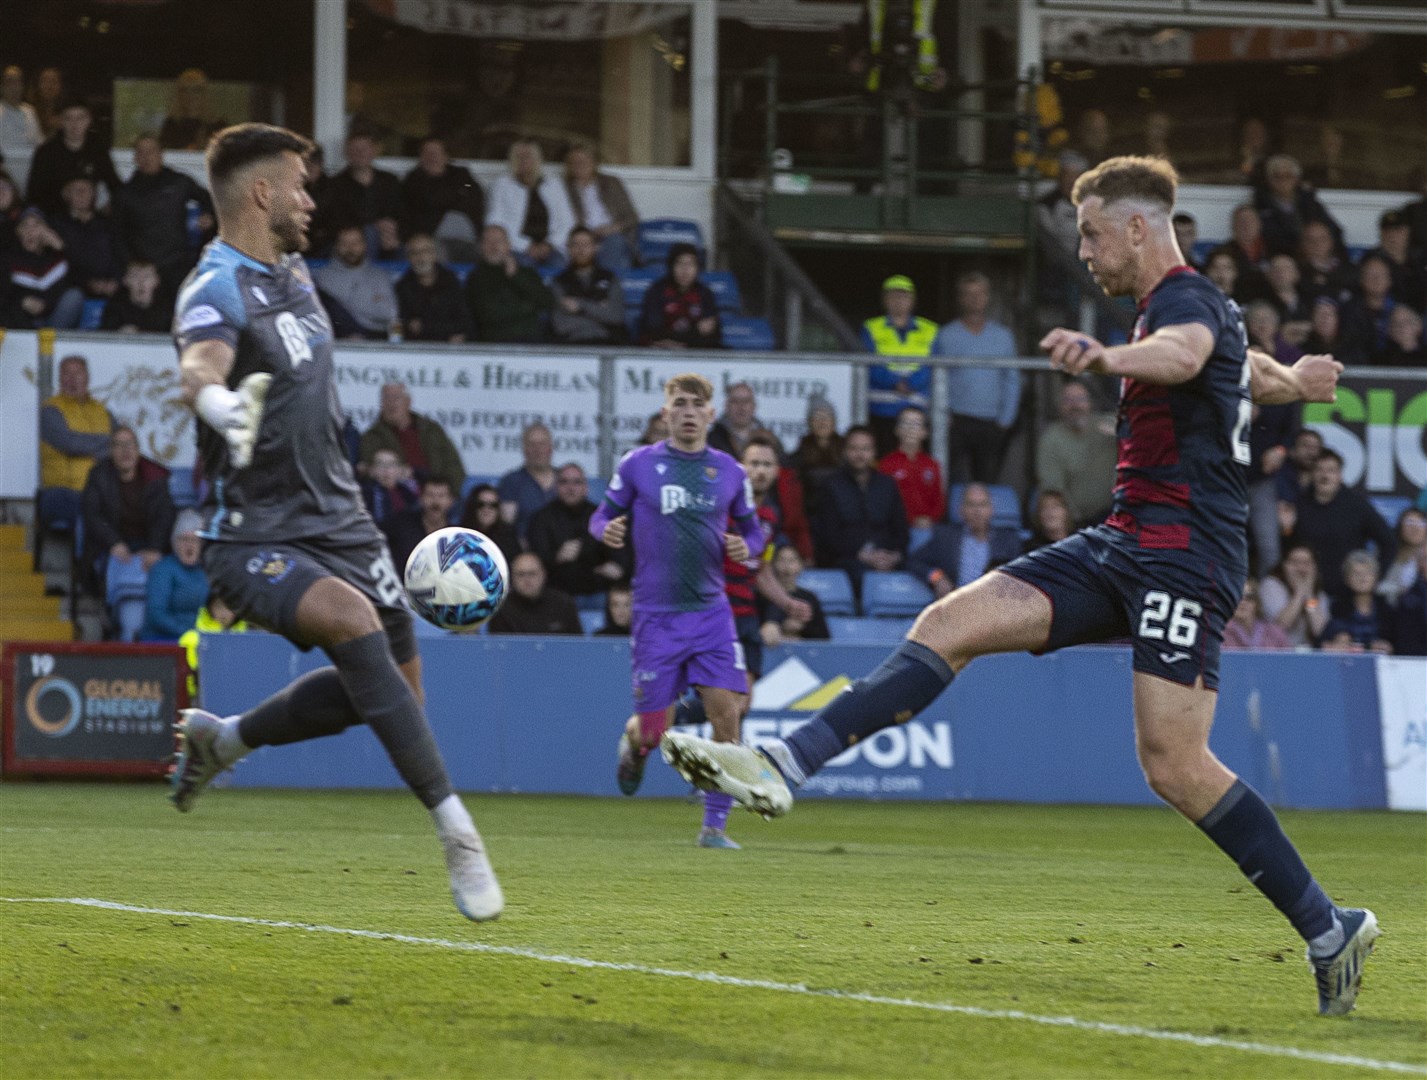 Jordan White scored four goals in Ross County's post-split matches – but he may not be able to feature in the play-offs. Picture: Ken Macpherson